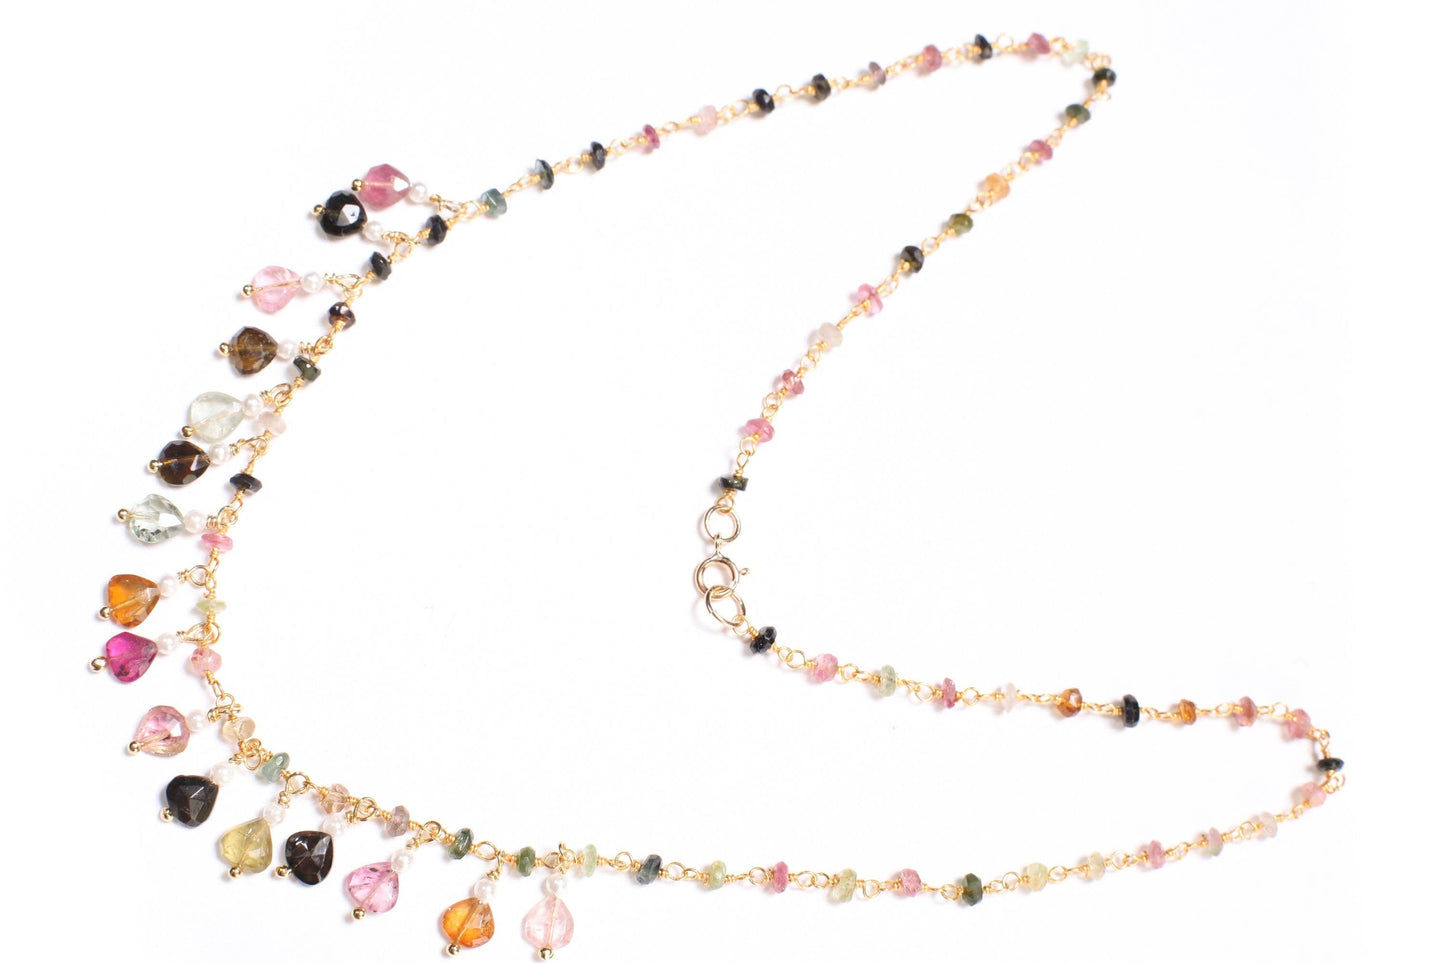 Multi Watermelon Tourmaline Faceted Heart Shape 5-6mm, Dangling Fresh Water Pearl Round Spacers in 14K Gold Filled Clasp, October Birthstone